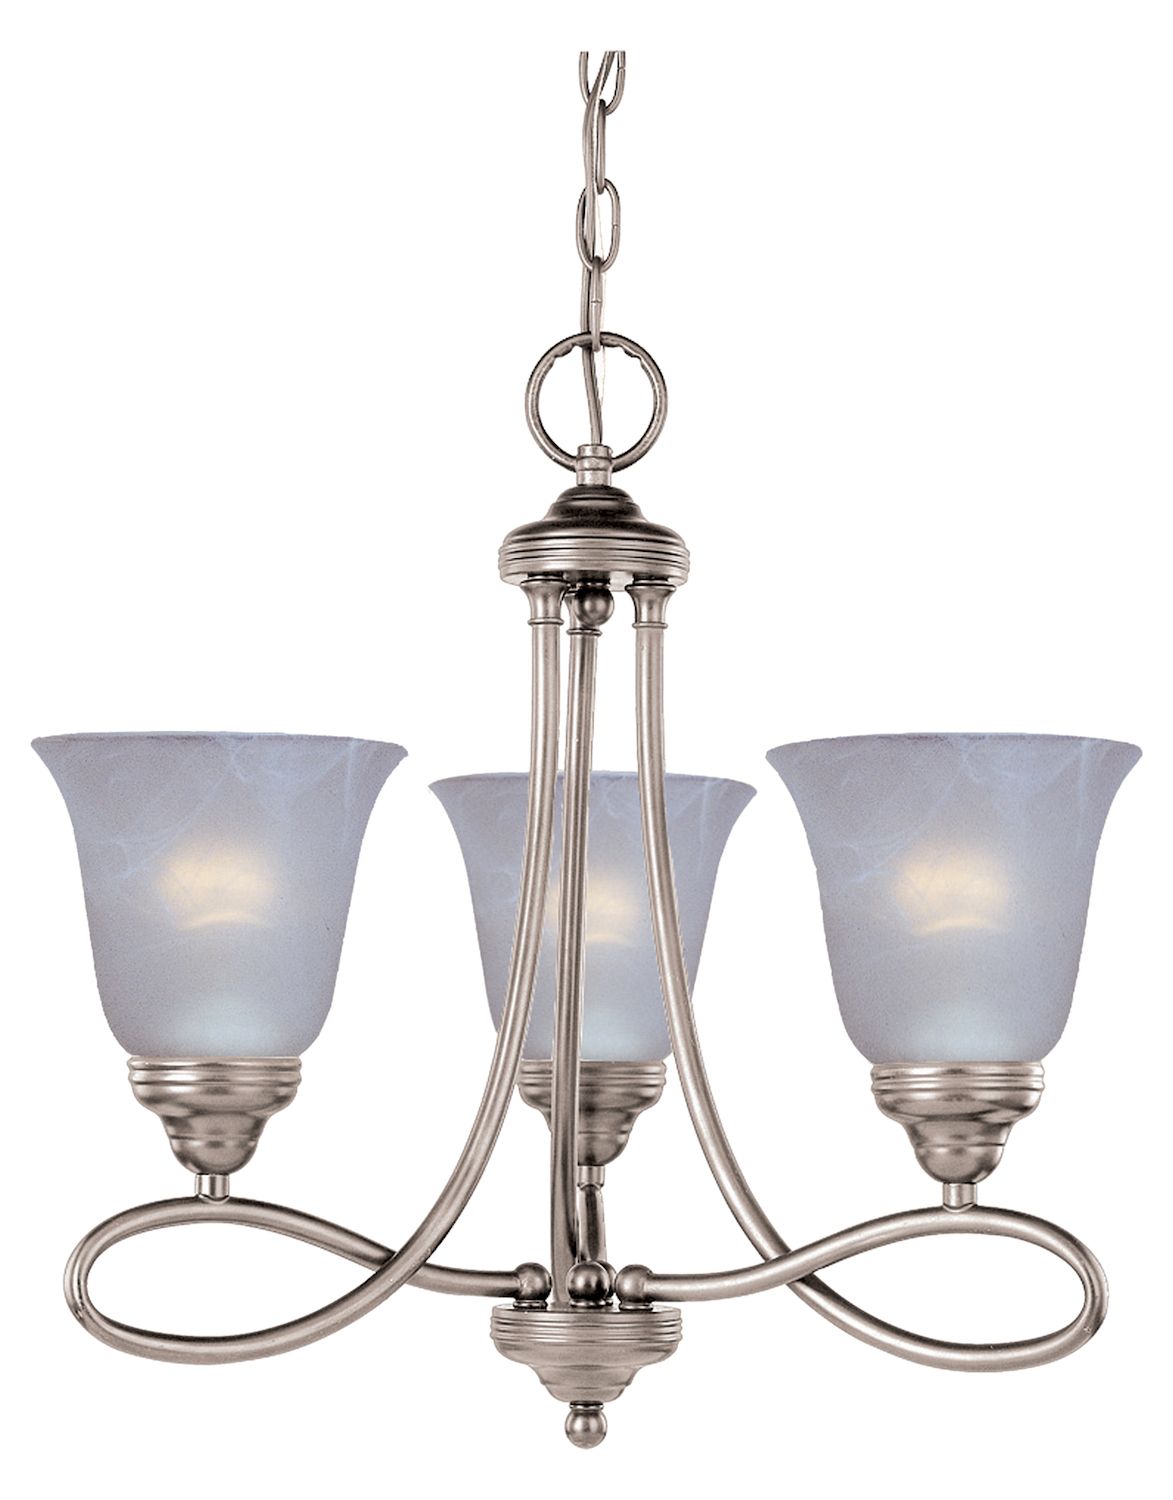 Maxim Three Light Satin Nickel Marble Glass Up Mini In Satin Nickel Crystal Chandeliers (View 10 of 15)